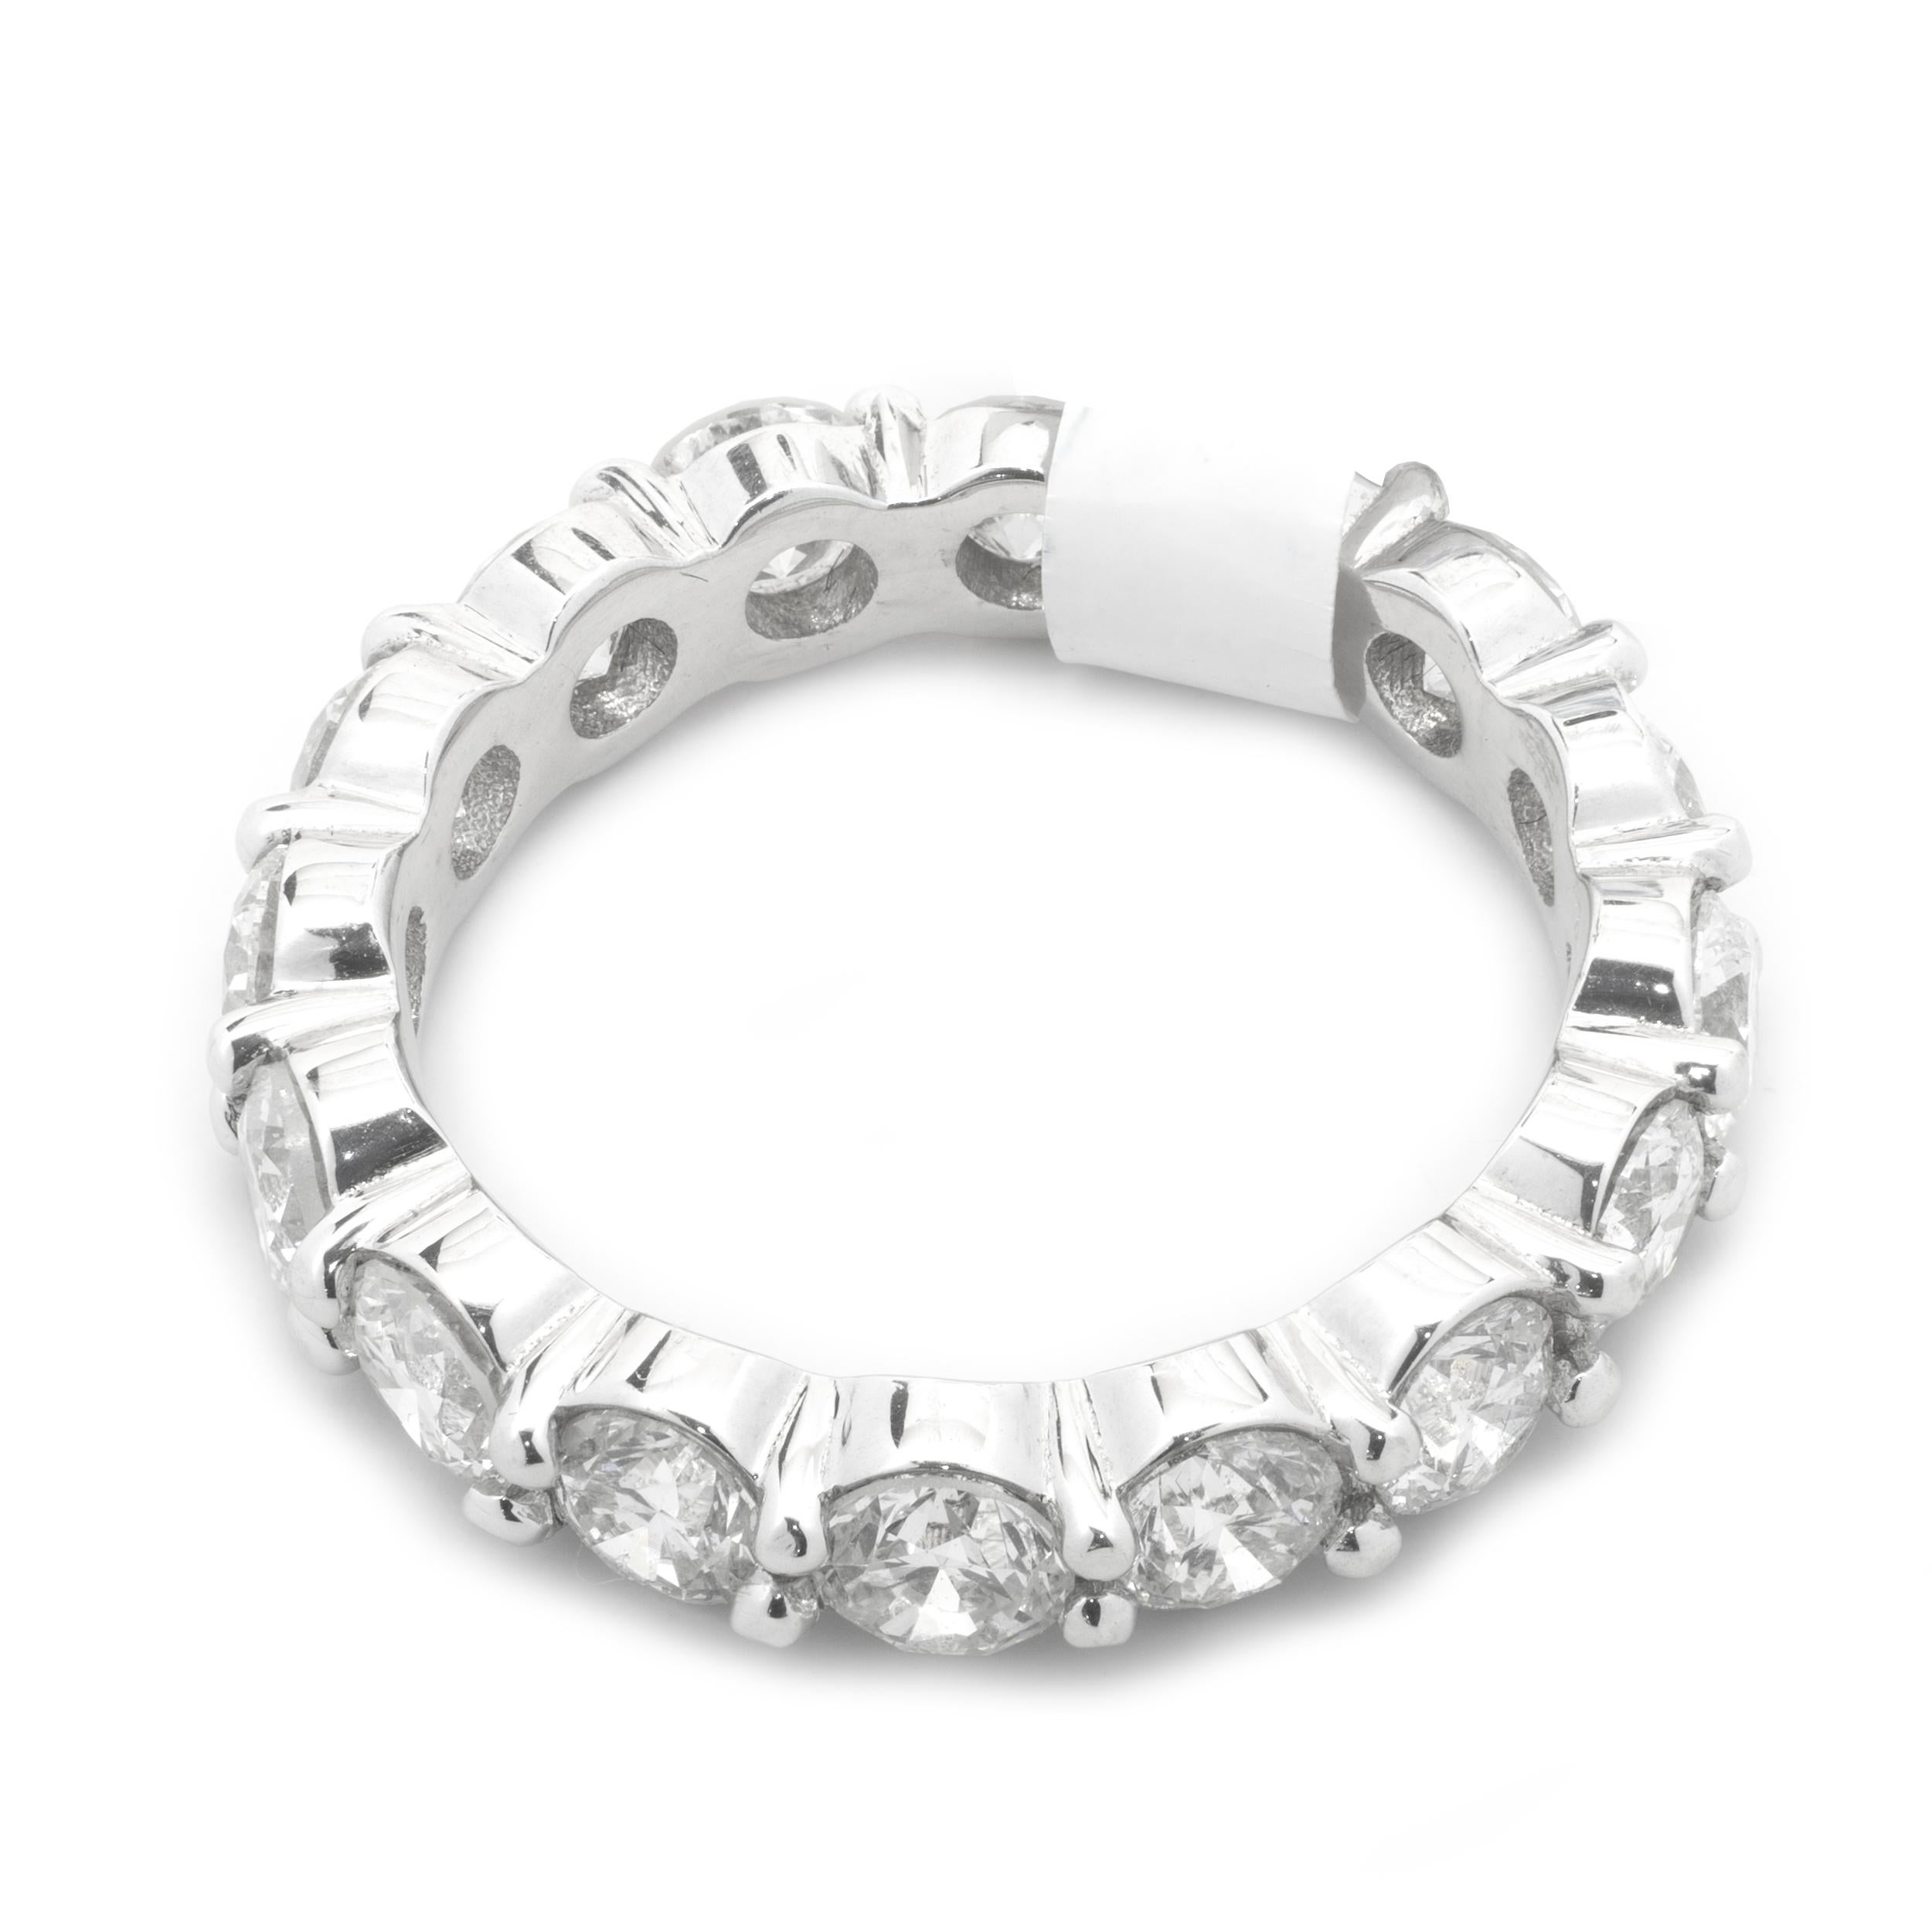 Designer: Custom
Material: 18K white gold 
Diamonds: 16 round brilliant cut = 3.80cttw 
Color: H/I
Clarity: SI1
Size: 7
Dimensions: ring measures 4.30mm in width
Weight: 4.50 grams
